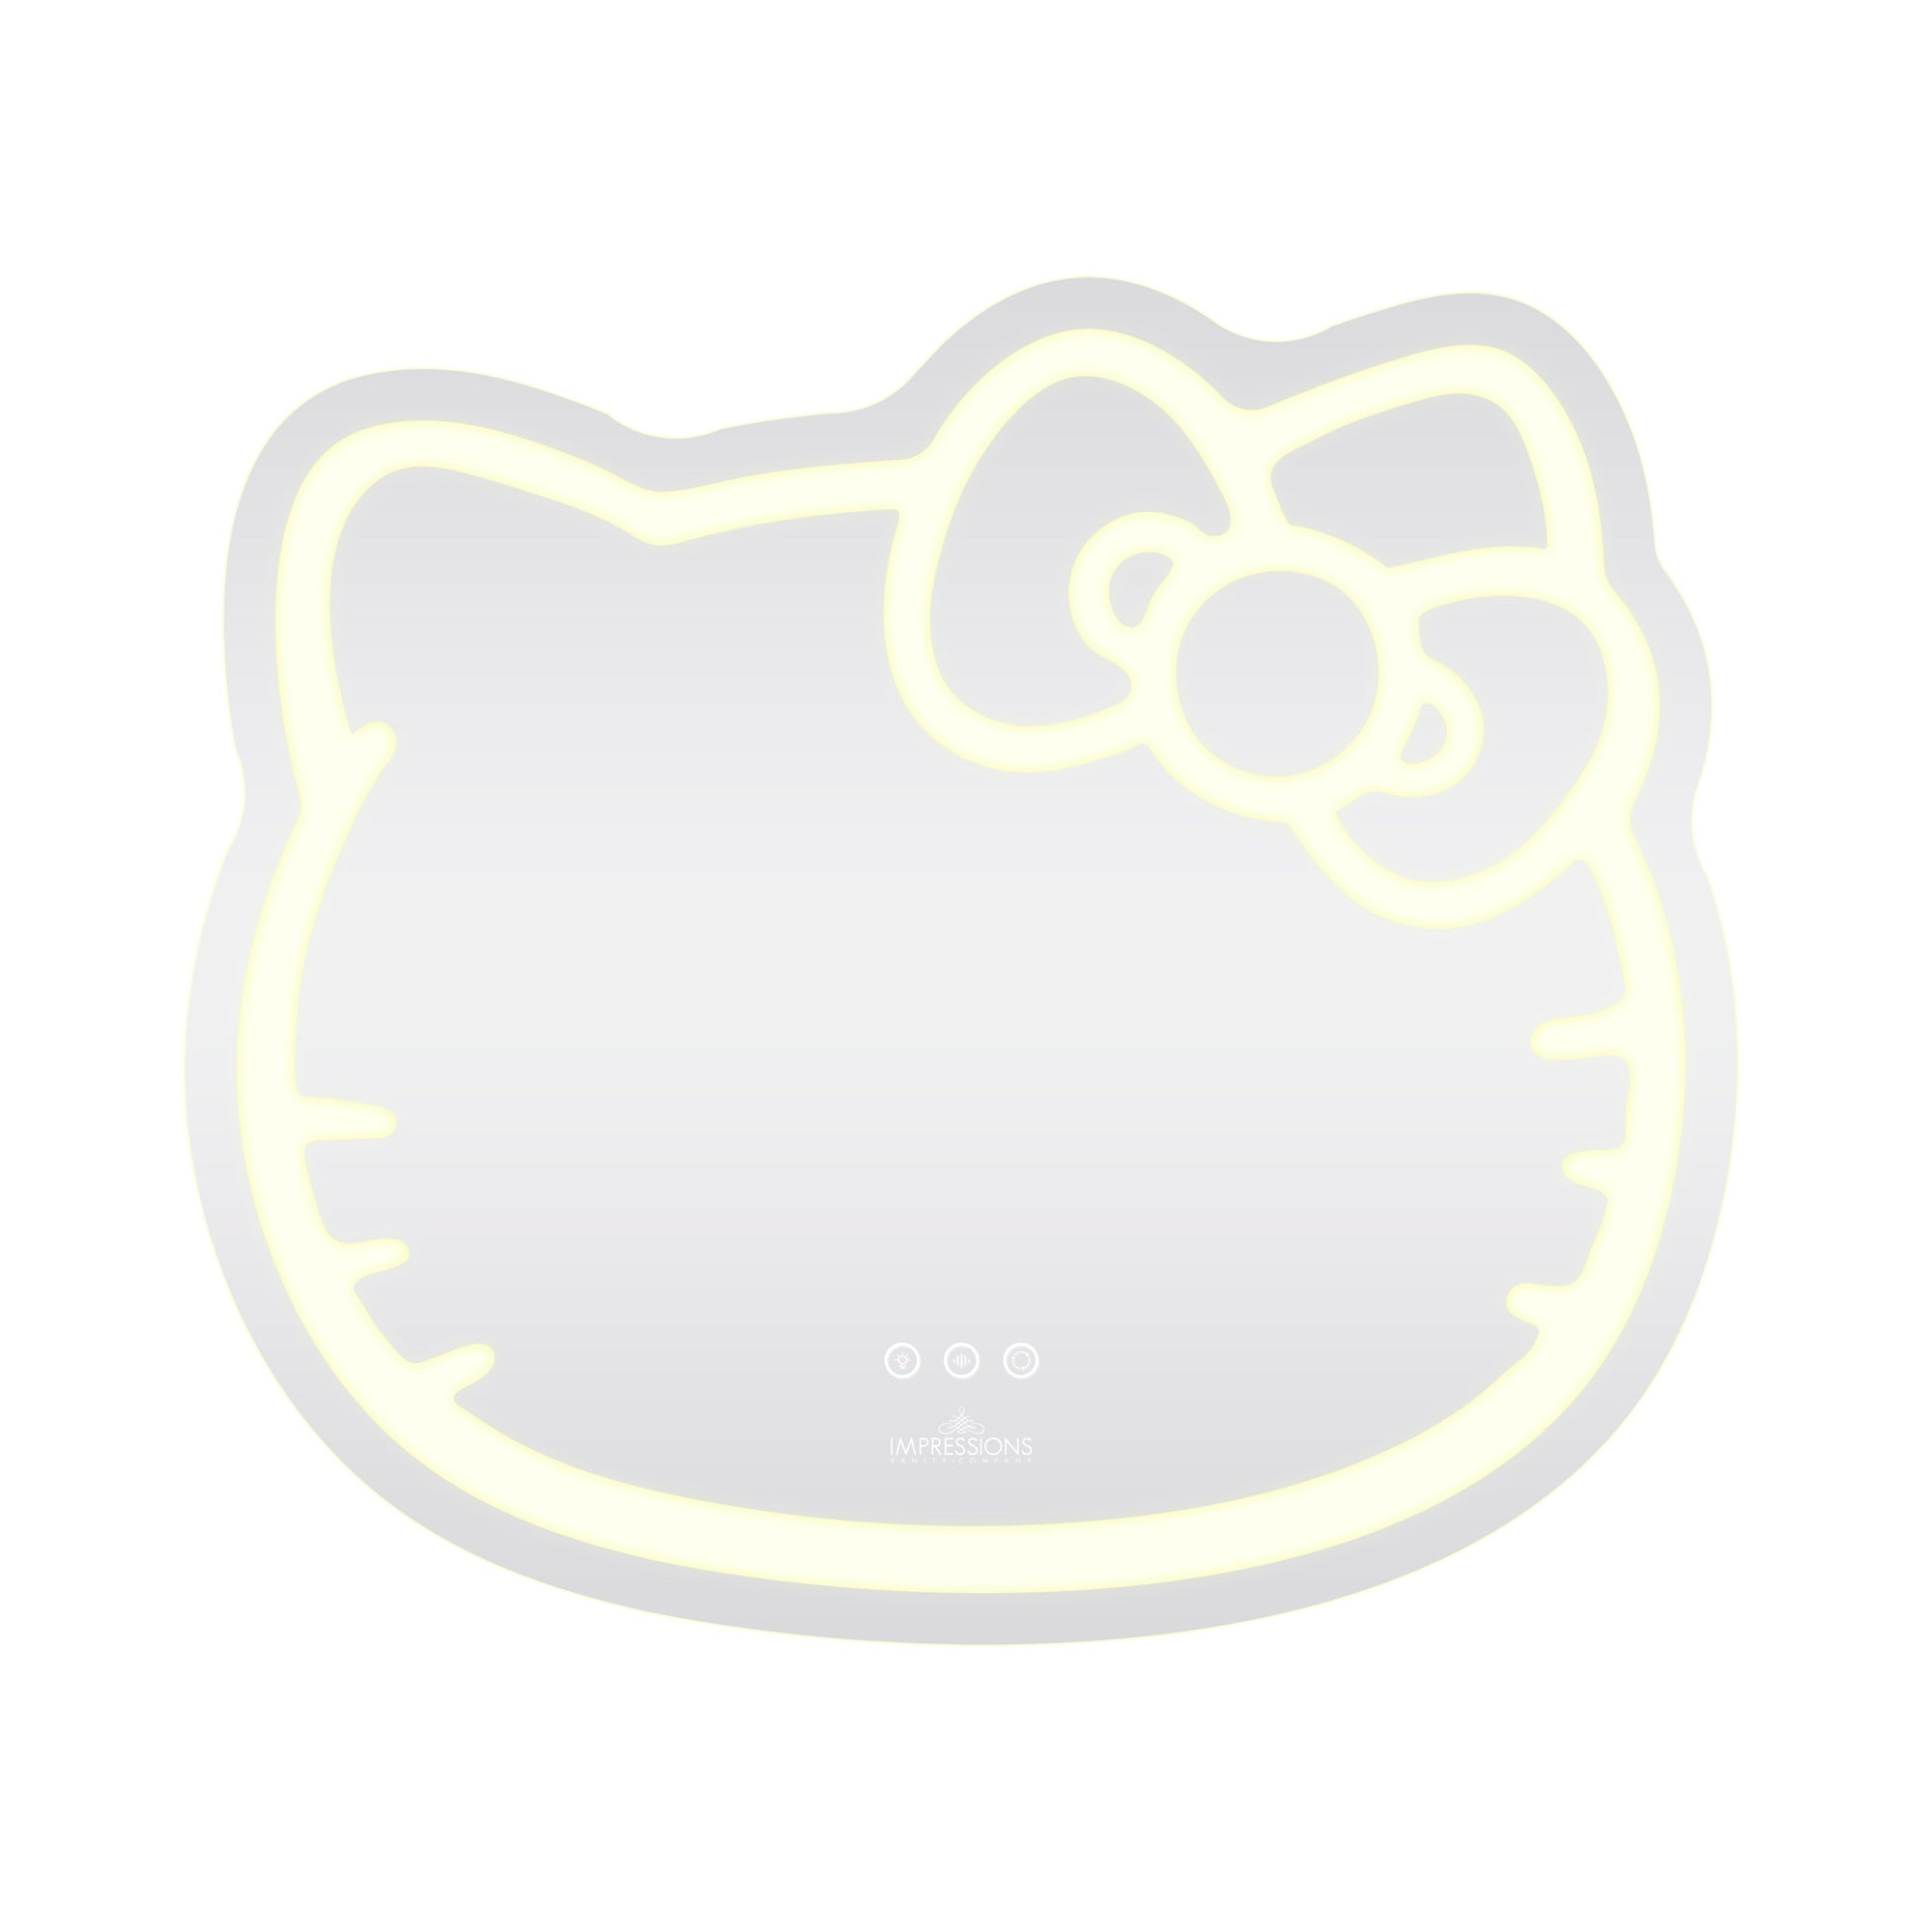 Made Hello Kitty walls for all. Hope you enjoy using them. Add